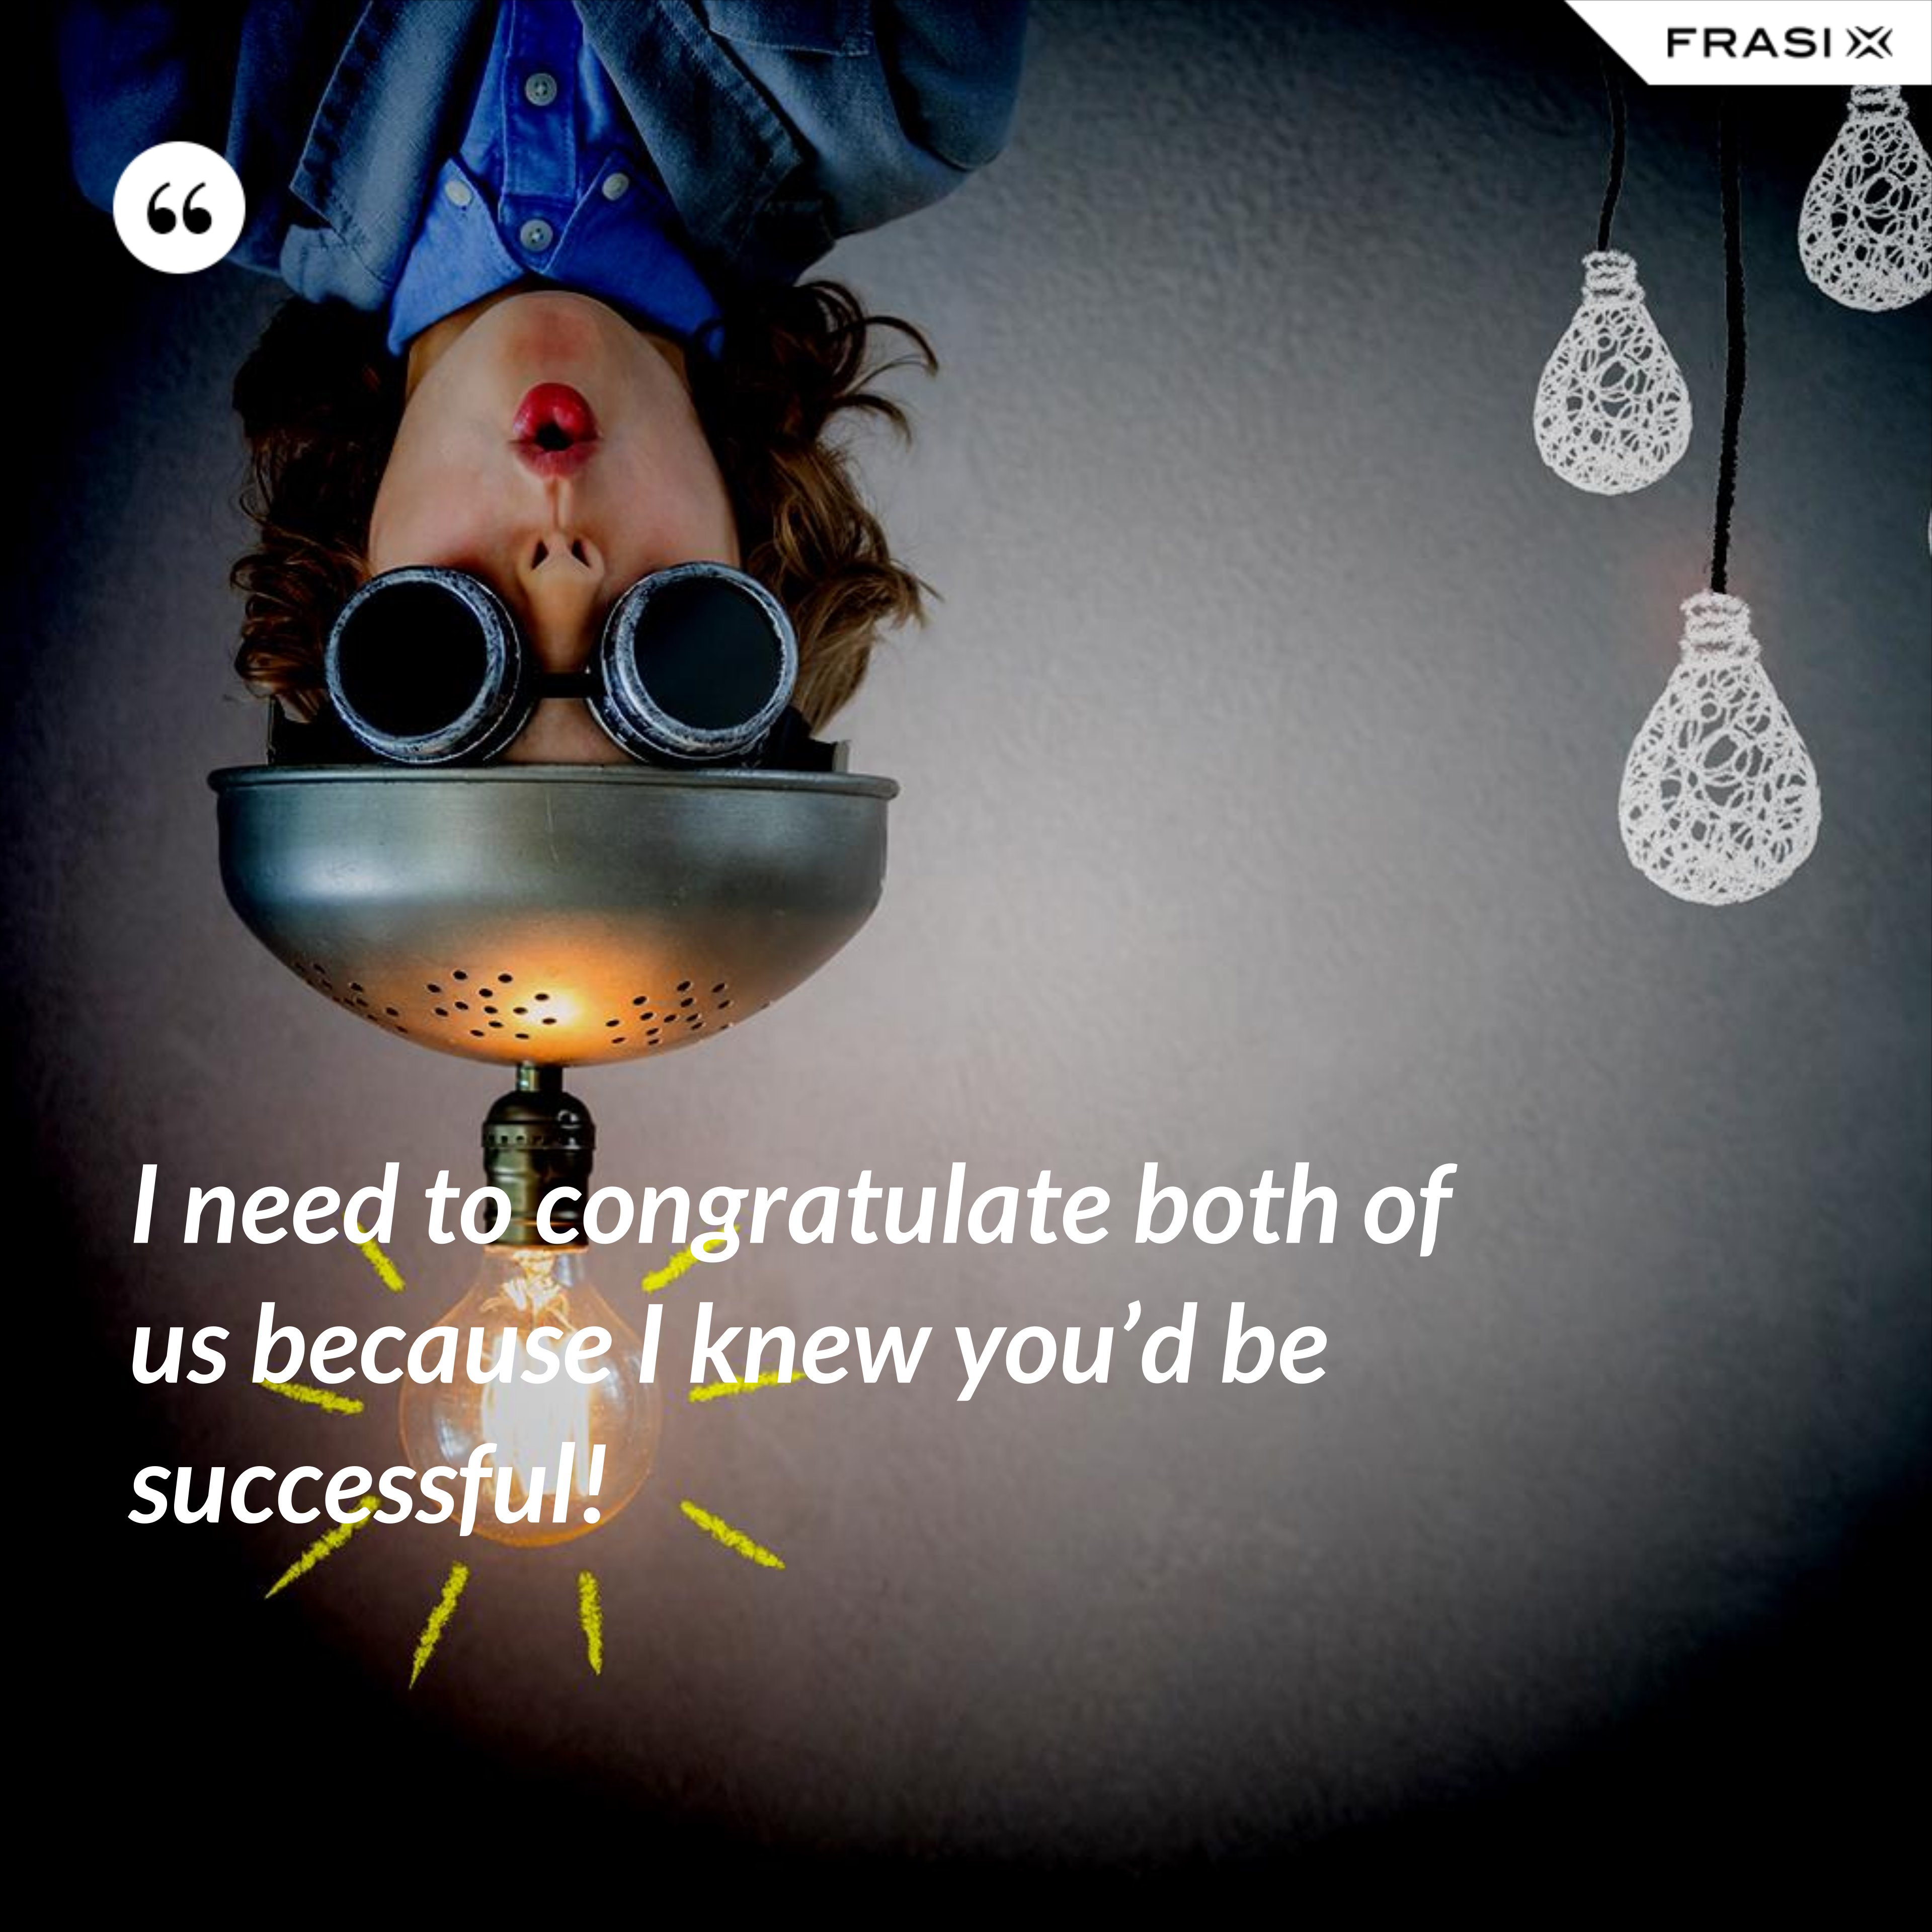 I need to congratulate both of us because I knew you’d be successful! - Anonimo